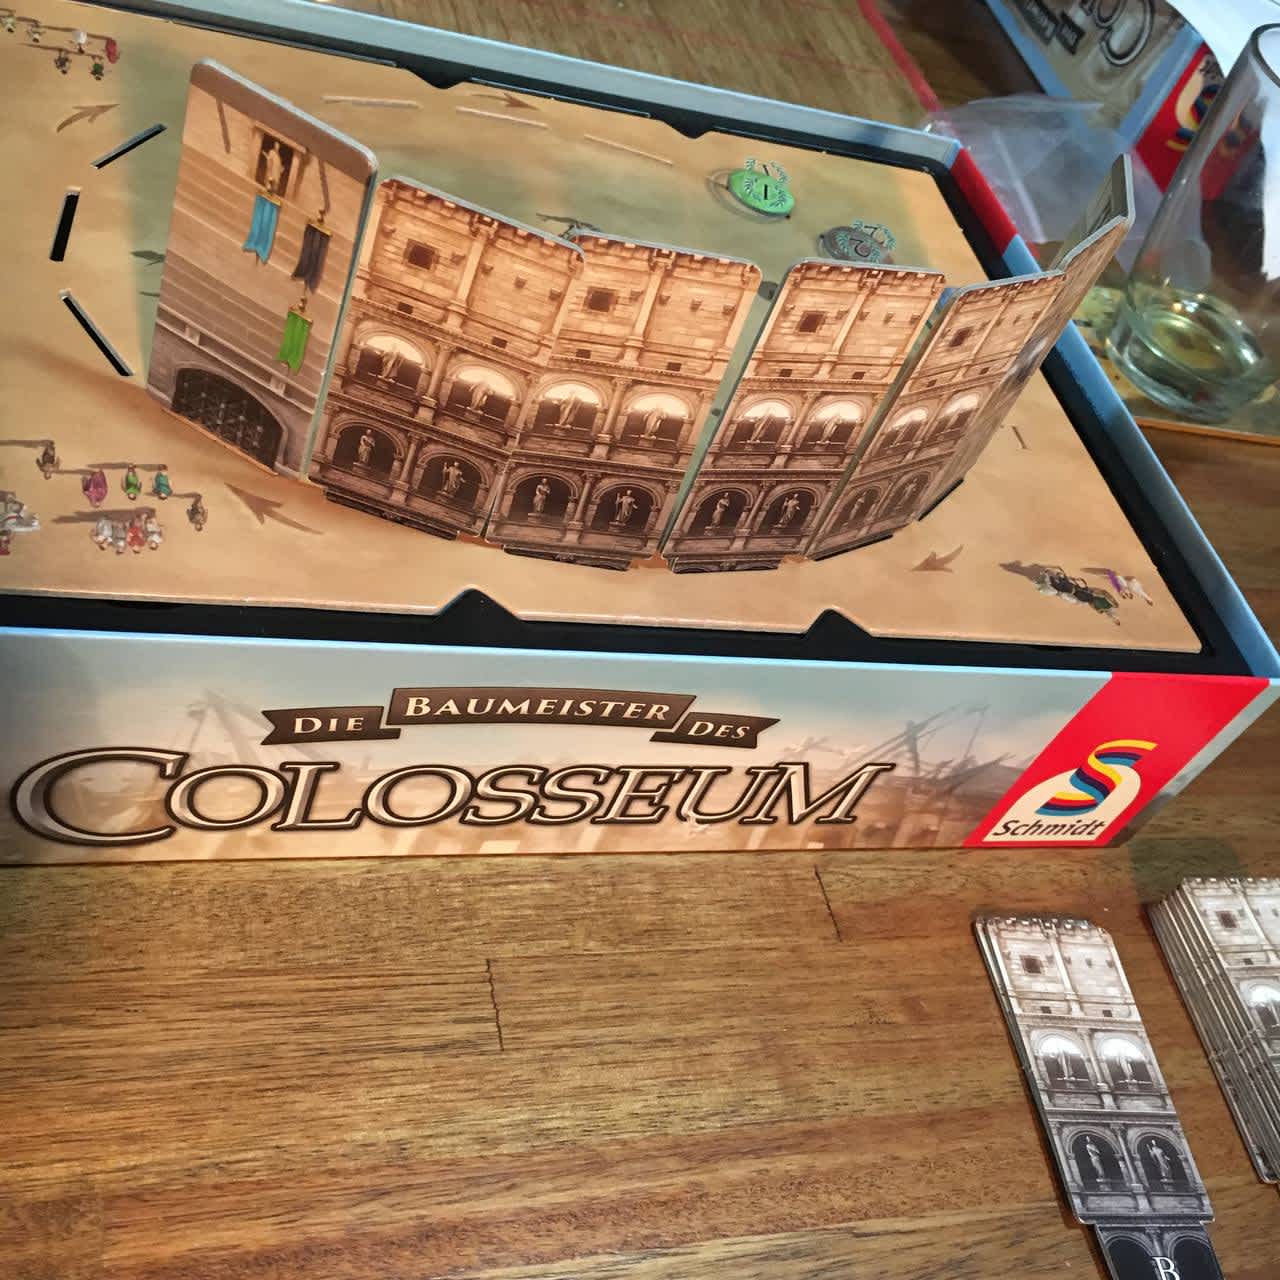 Architects of the Colosseum